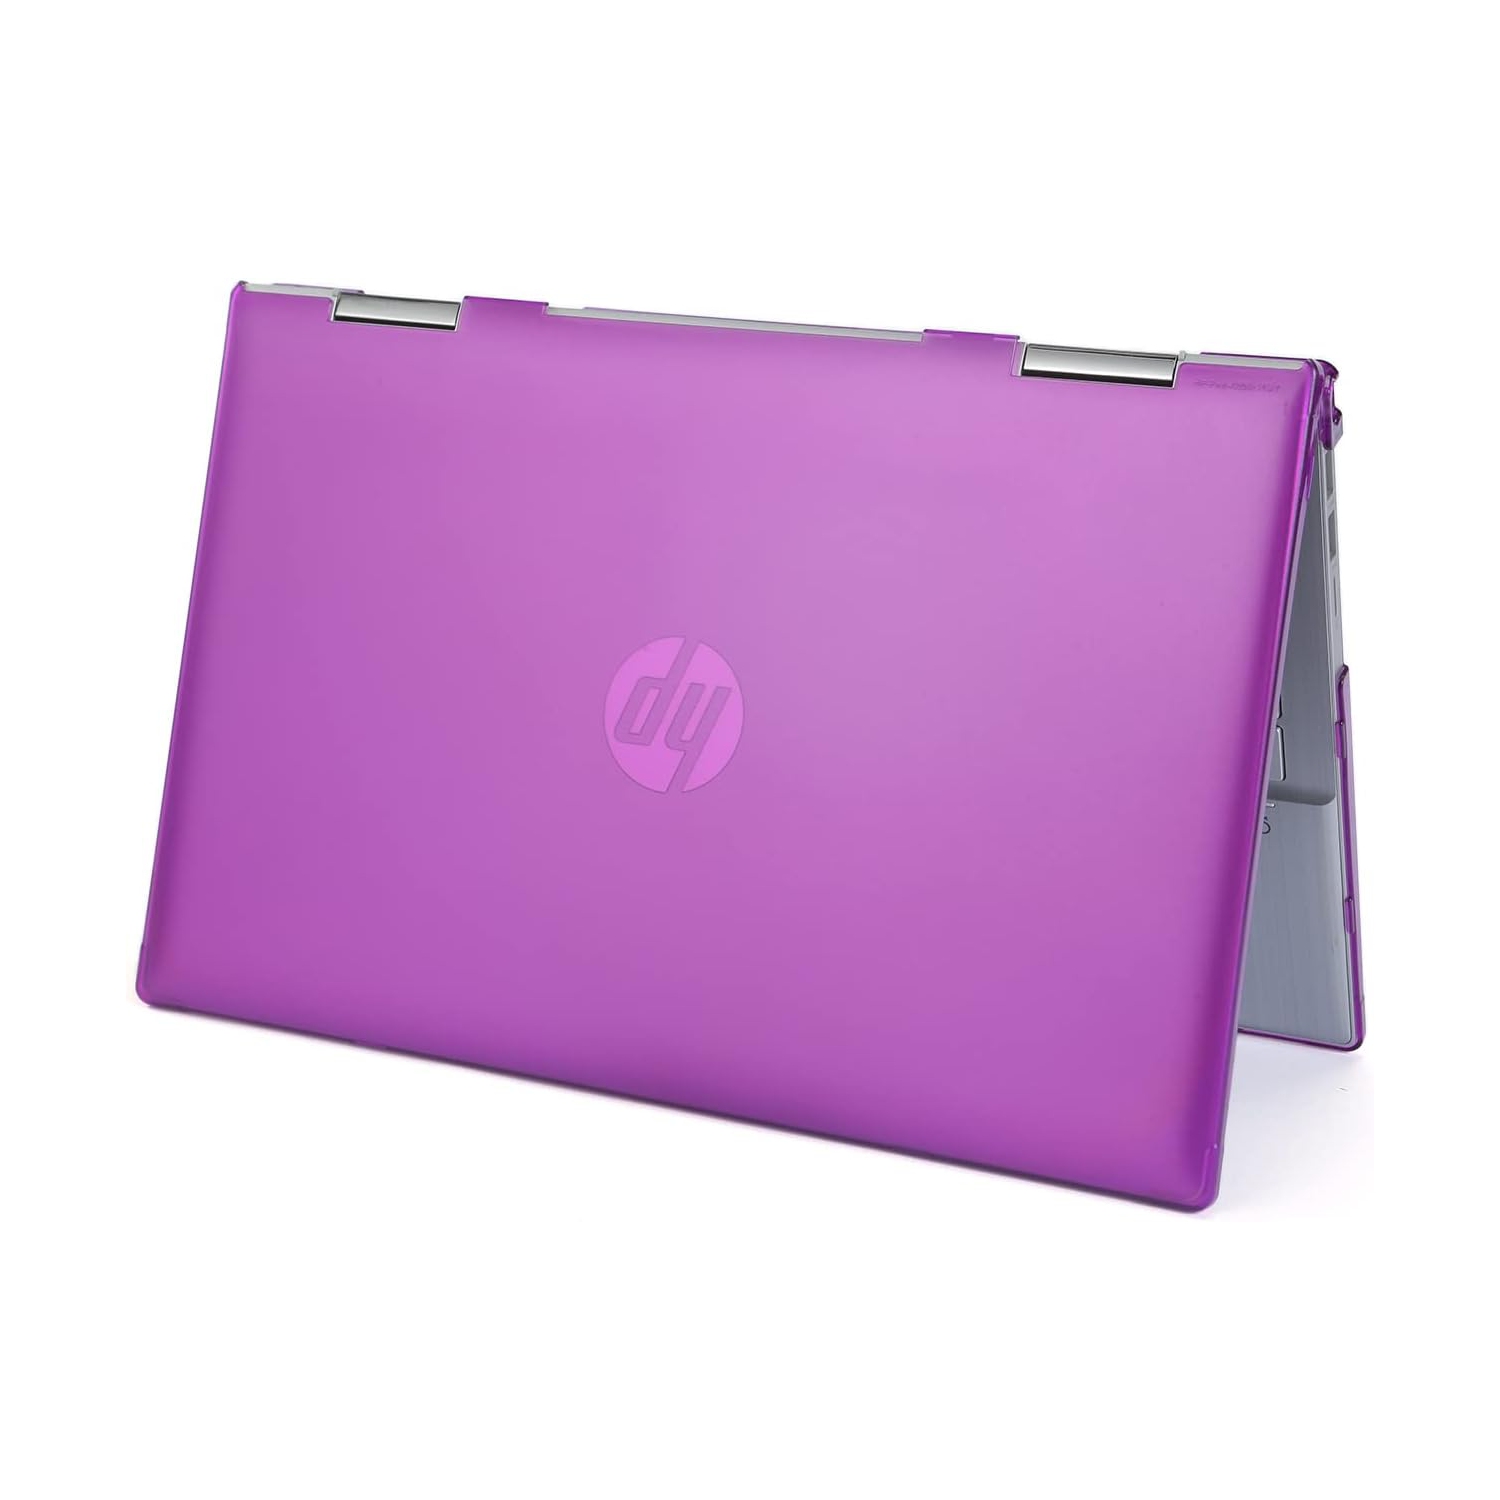 Hard Shell Case ONLY Compatible with 2021/2022 14" HP Pavilion x360 14-DYxxxx Series (NOT Compatible with Other